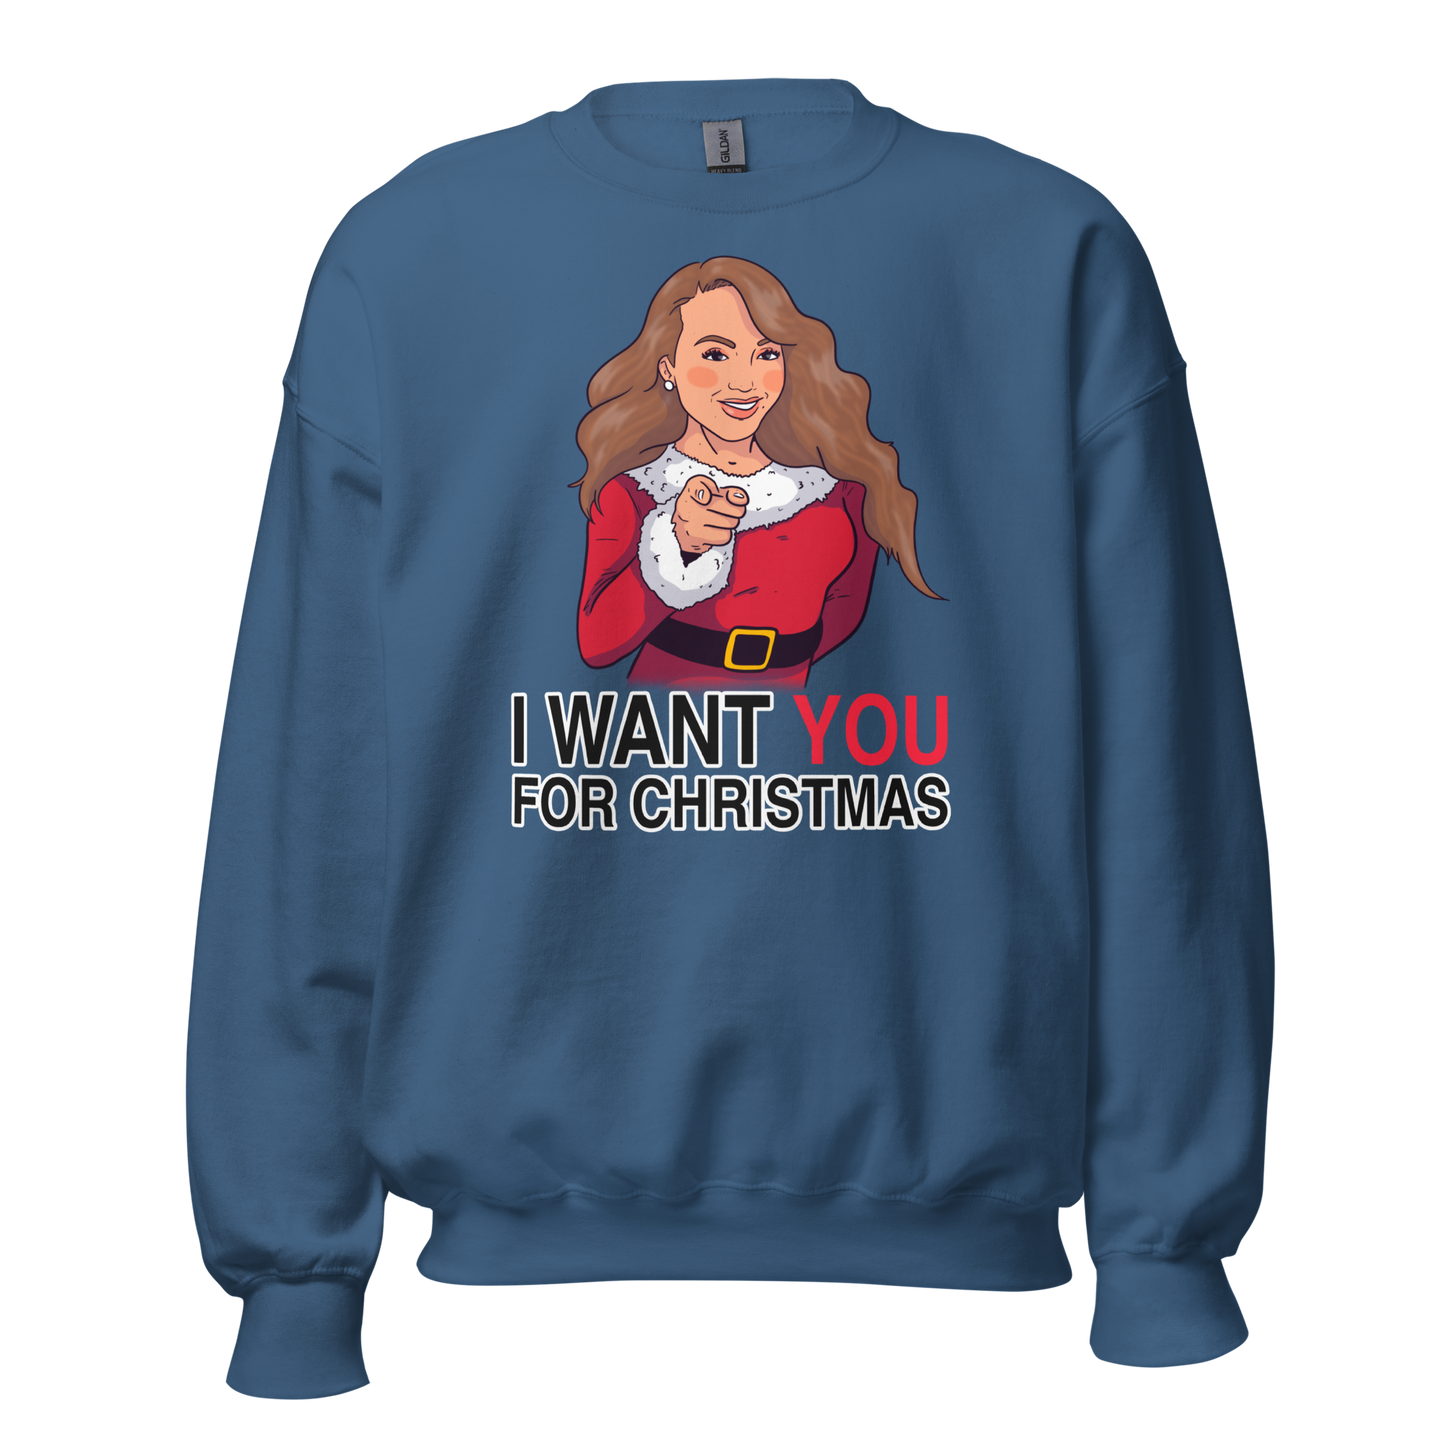 She Wants You Crew Neck